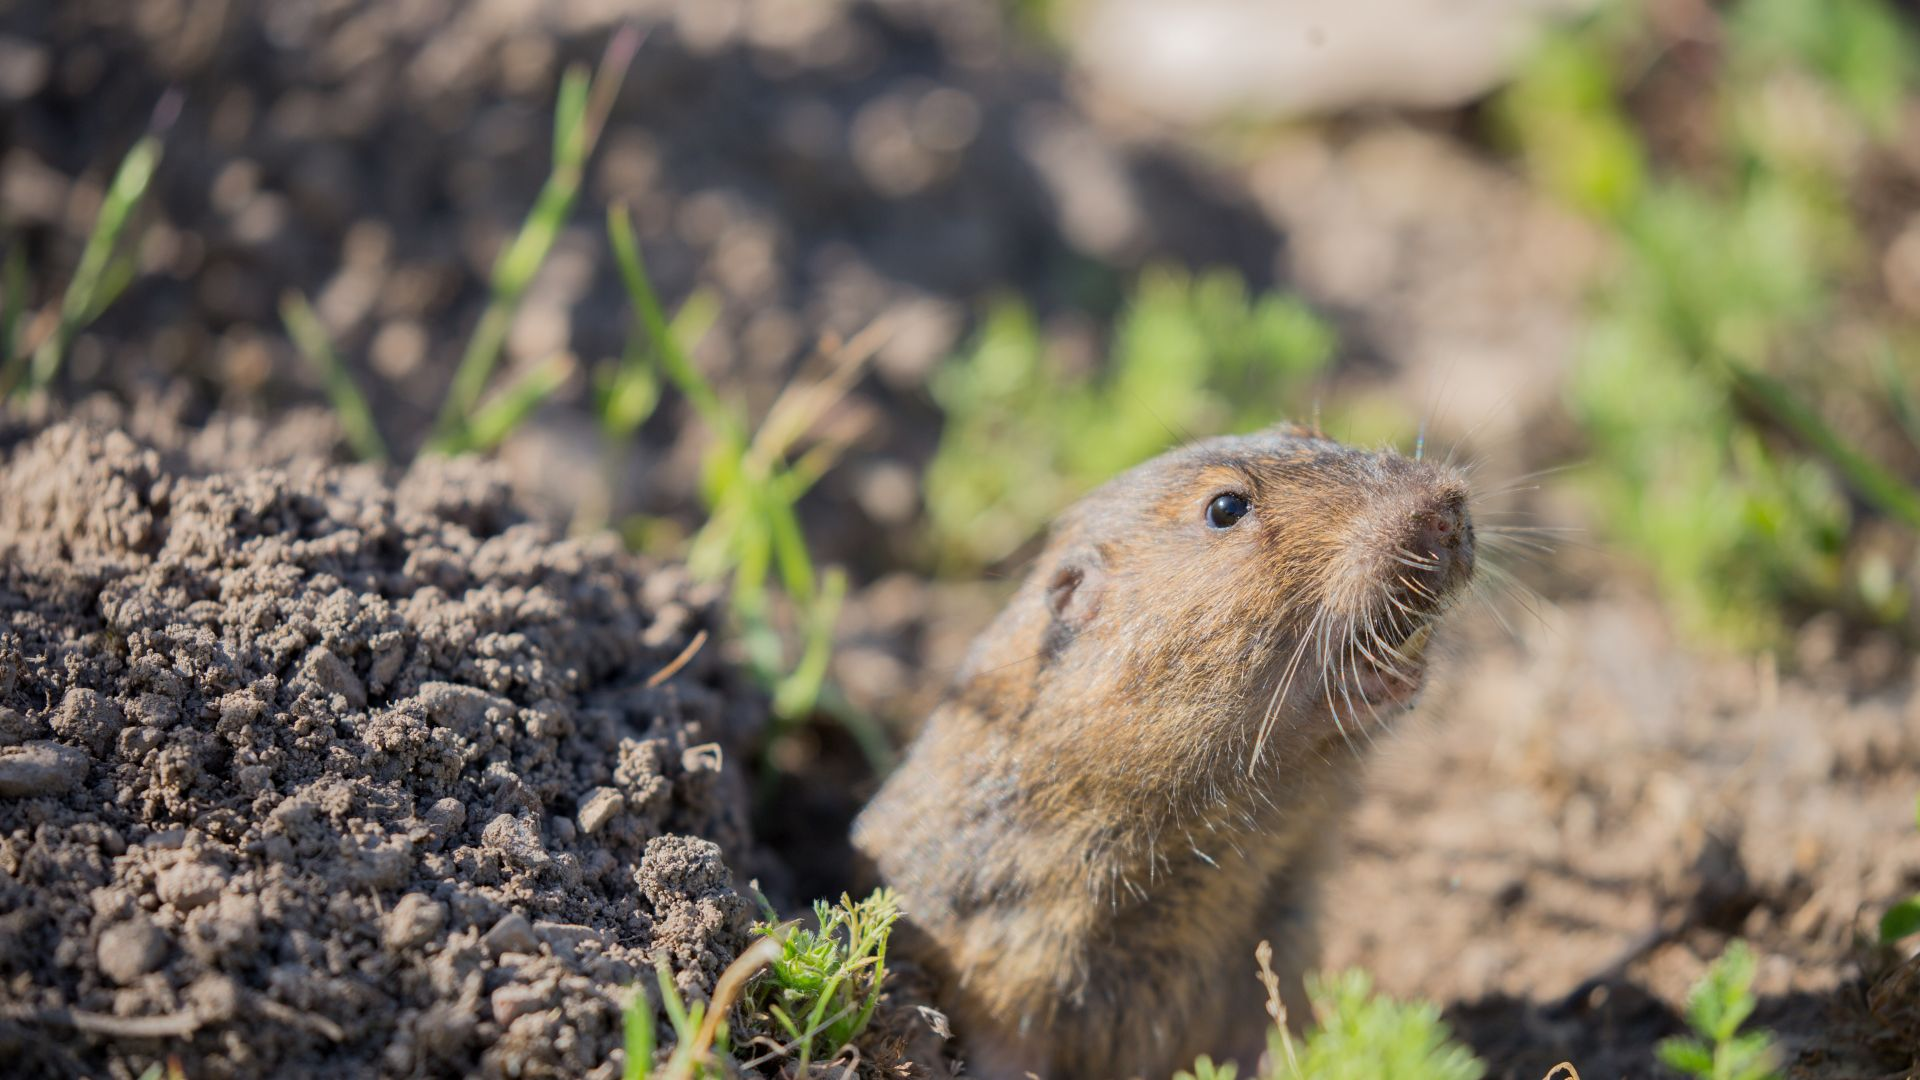 An image of a gopher hole with a gopher peeking out.